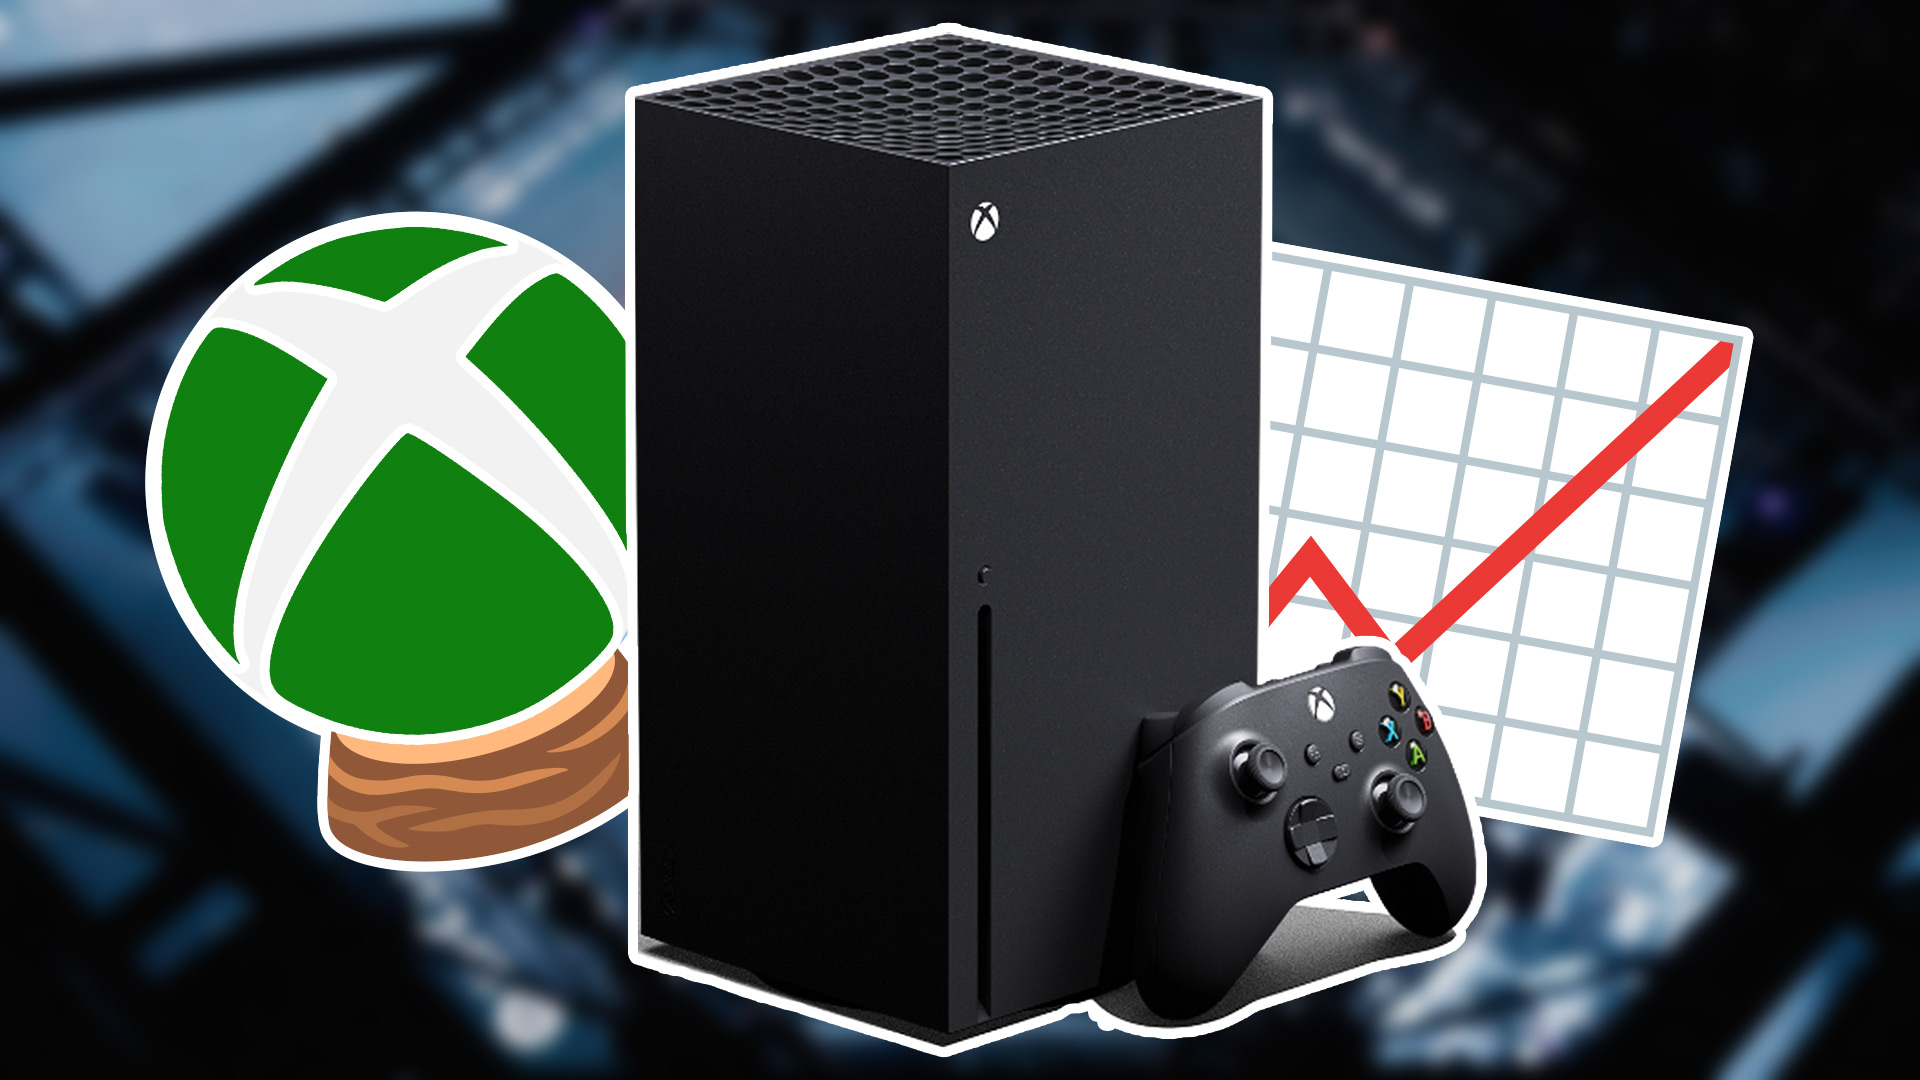 Next-Gen Xbox Could Be 'Largest Technical Leap' You Have Ever